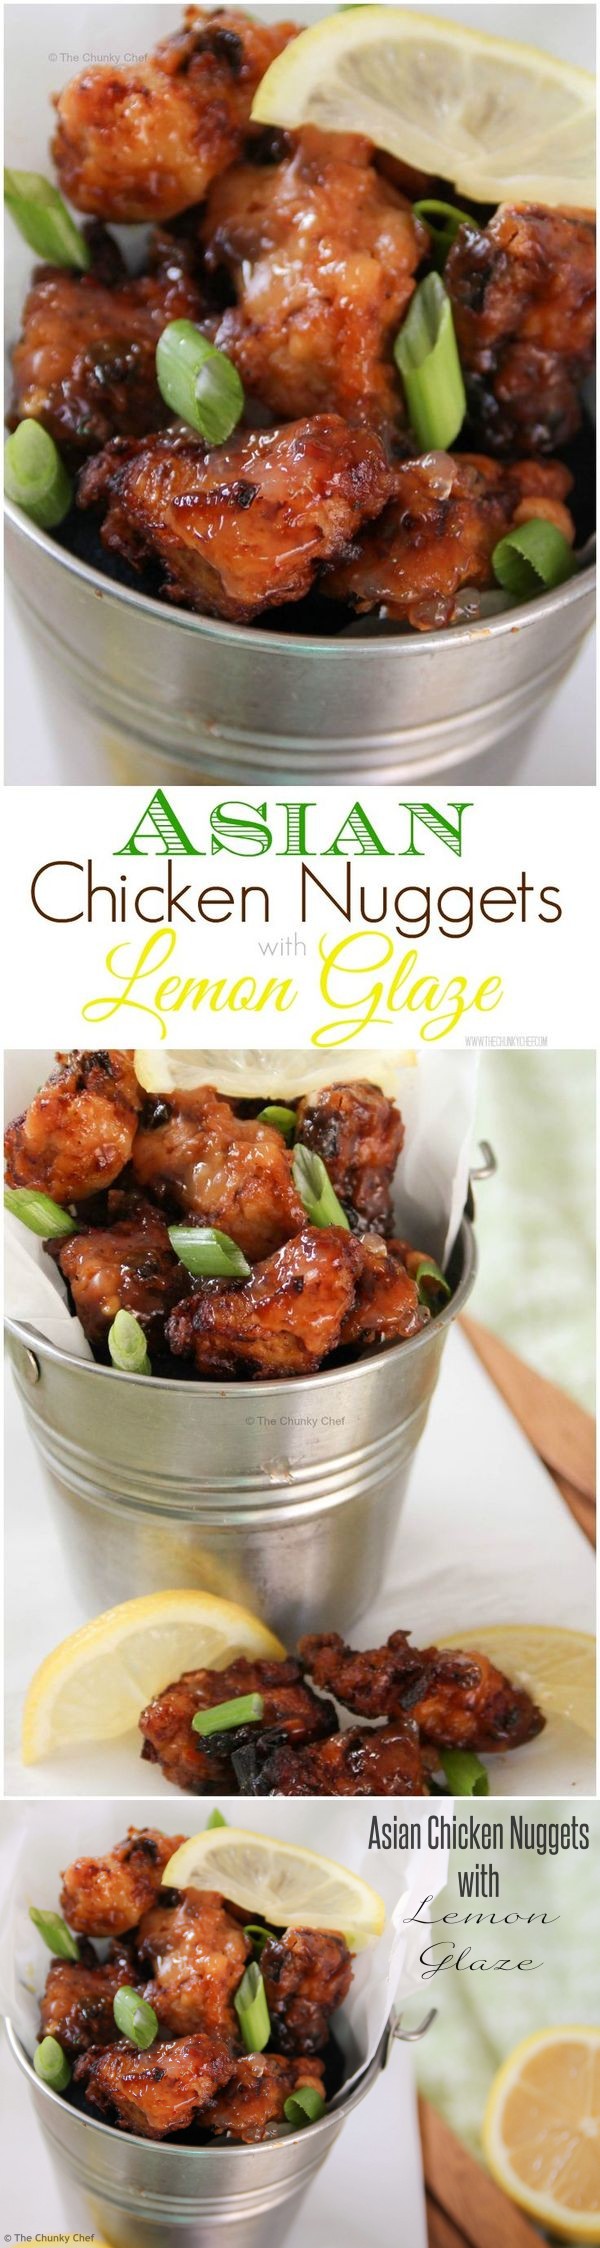 Asian-style Chicken Nuggets